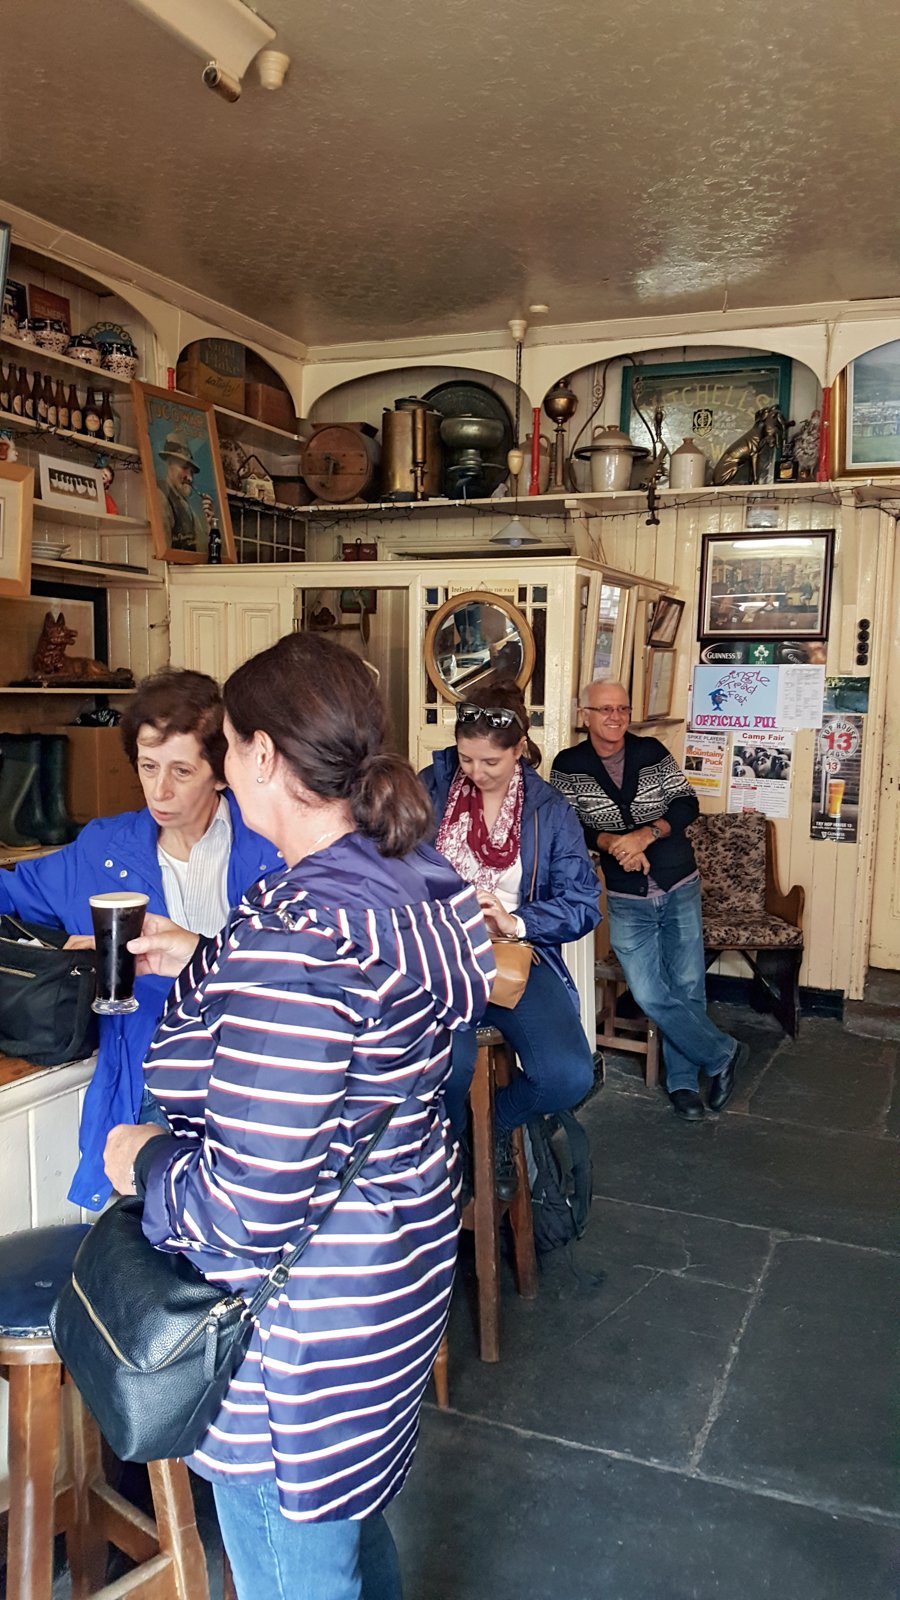 Sampling the pints in Dingle with the family,October 2016.